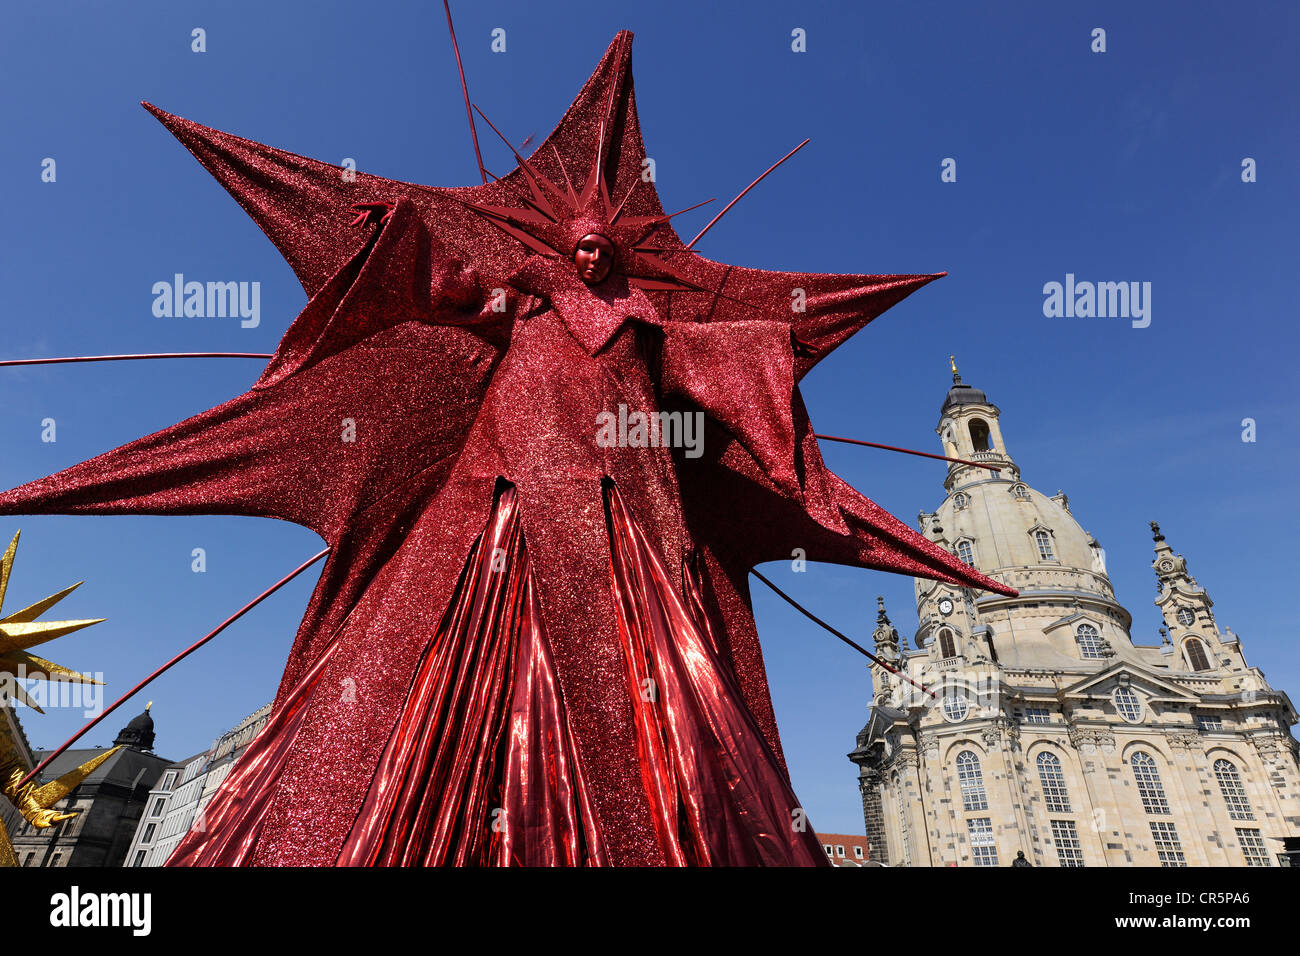 City Festival in Dresden, large red star-shaped figure in front of the Church of Our Lady on Neumarkt square, Saxony Stock Photo